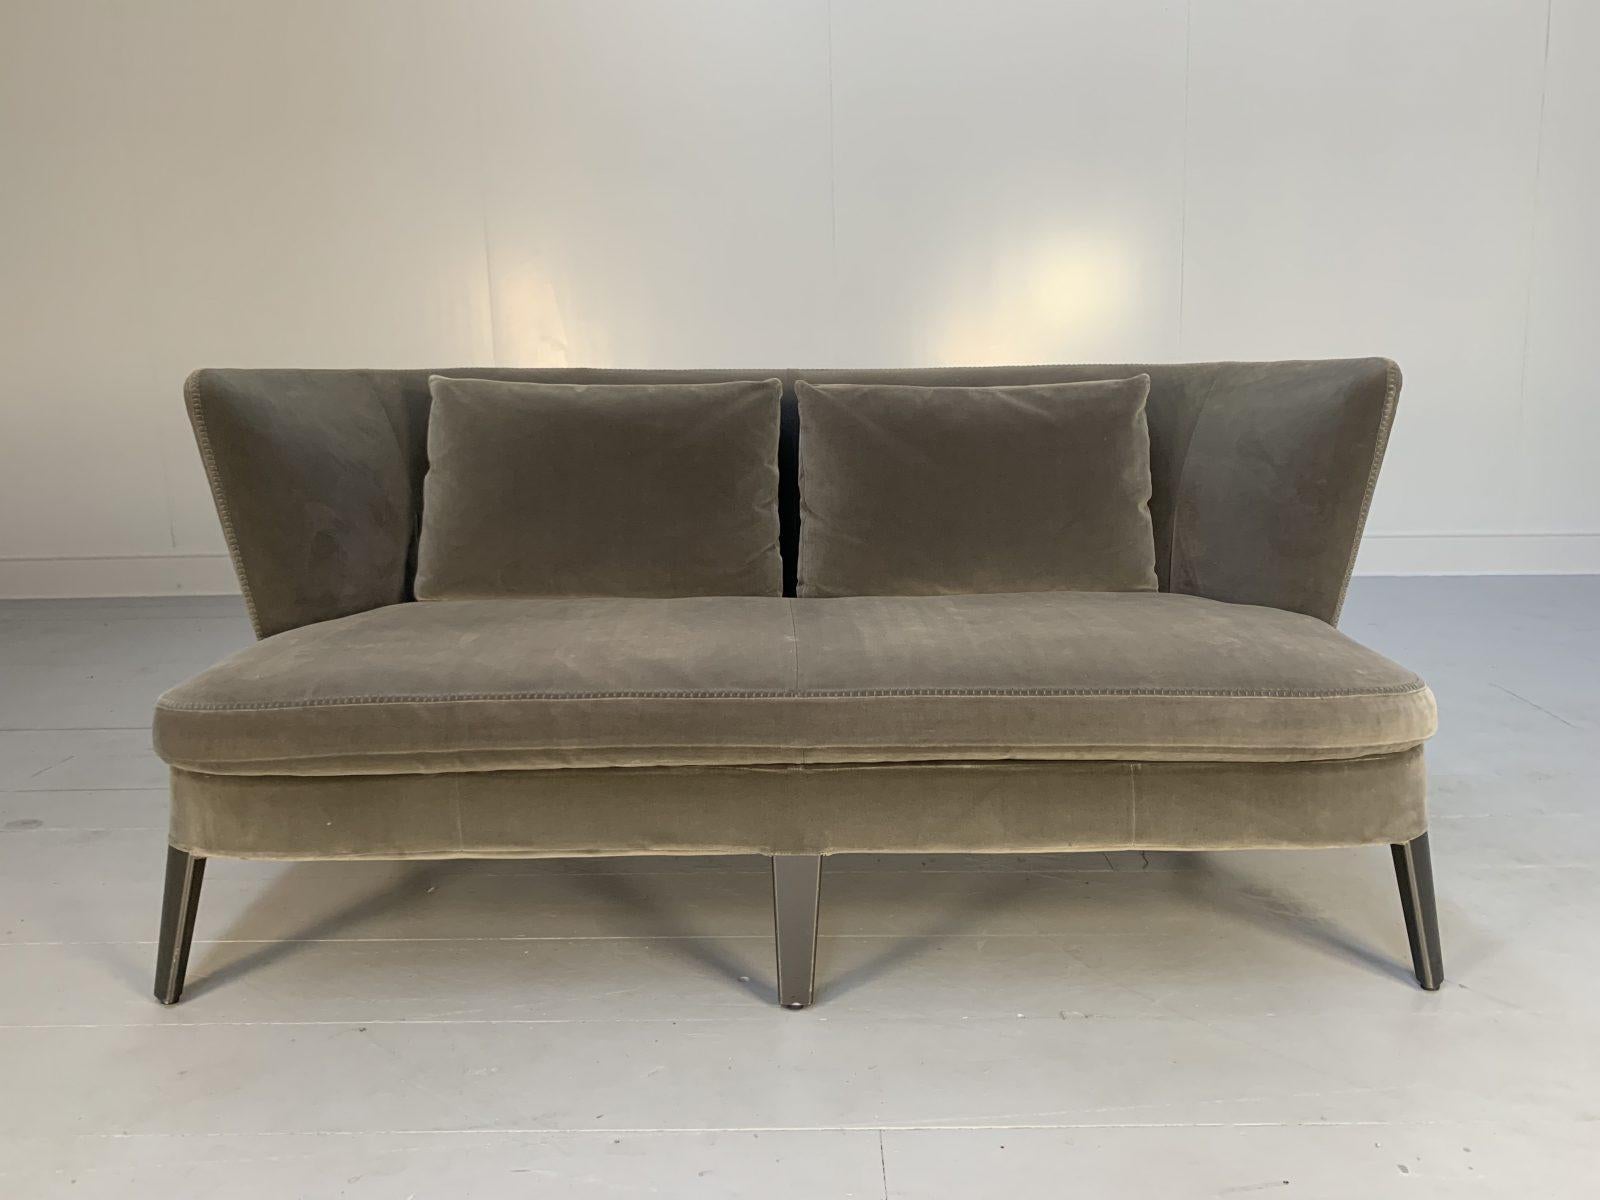 This is a superb, rare B&B Italia Maxalto “Febo 2802AT” 2.5-Seat Sofa dressed in a elegant, demure Italian Velvet in Pale Grey.

In a world of temporary pleasures, B&B Italia create beautiful furniture that remains a joy forever and, in